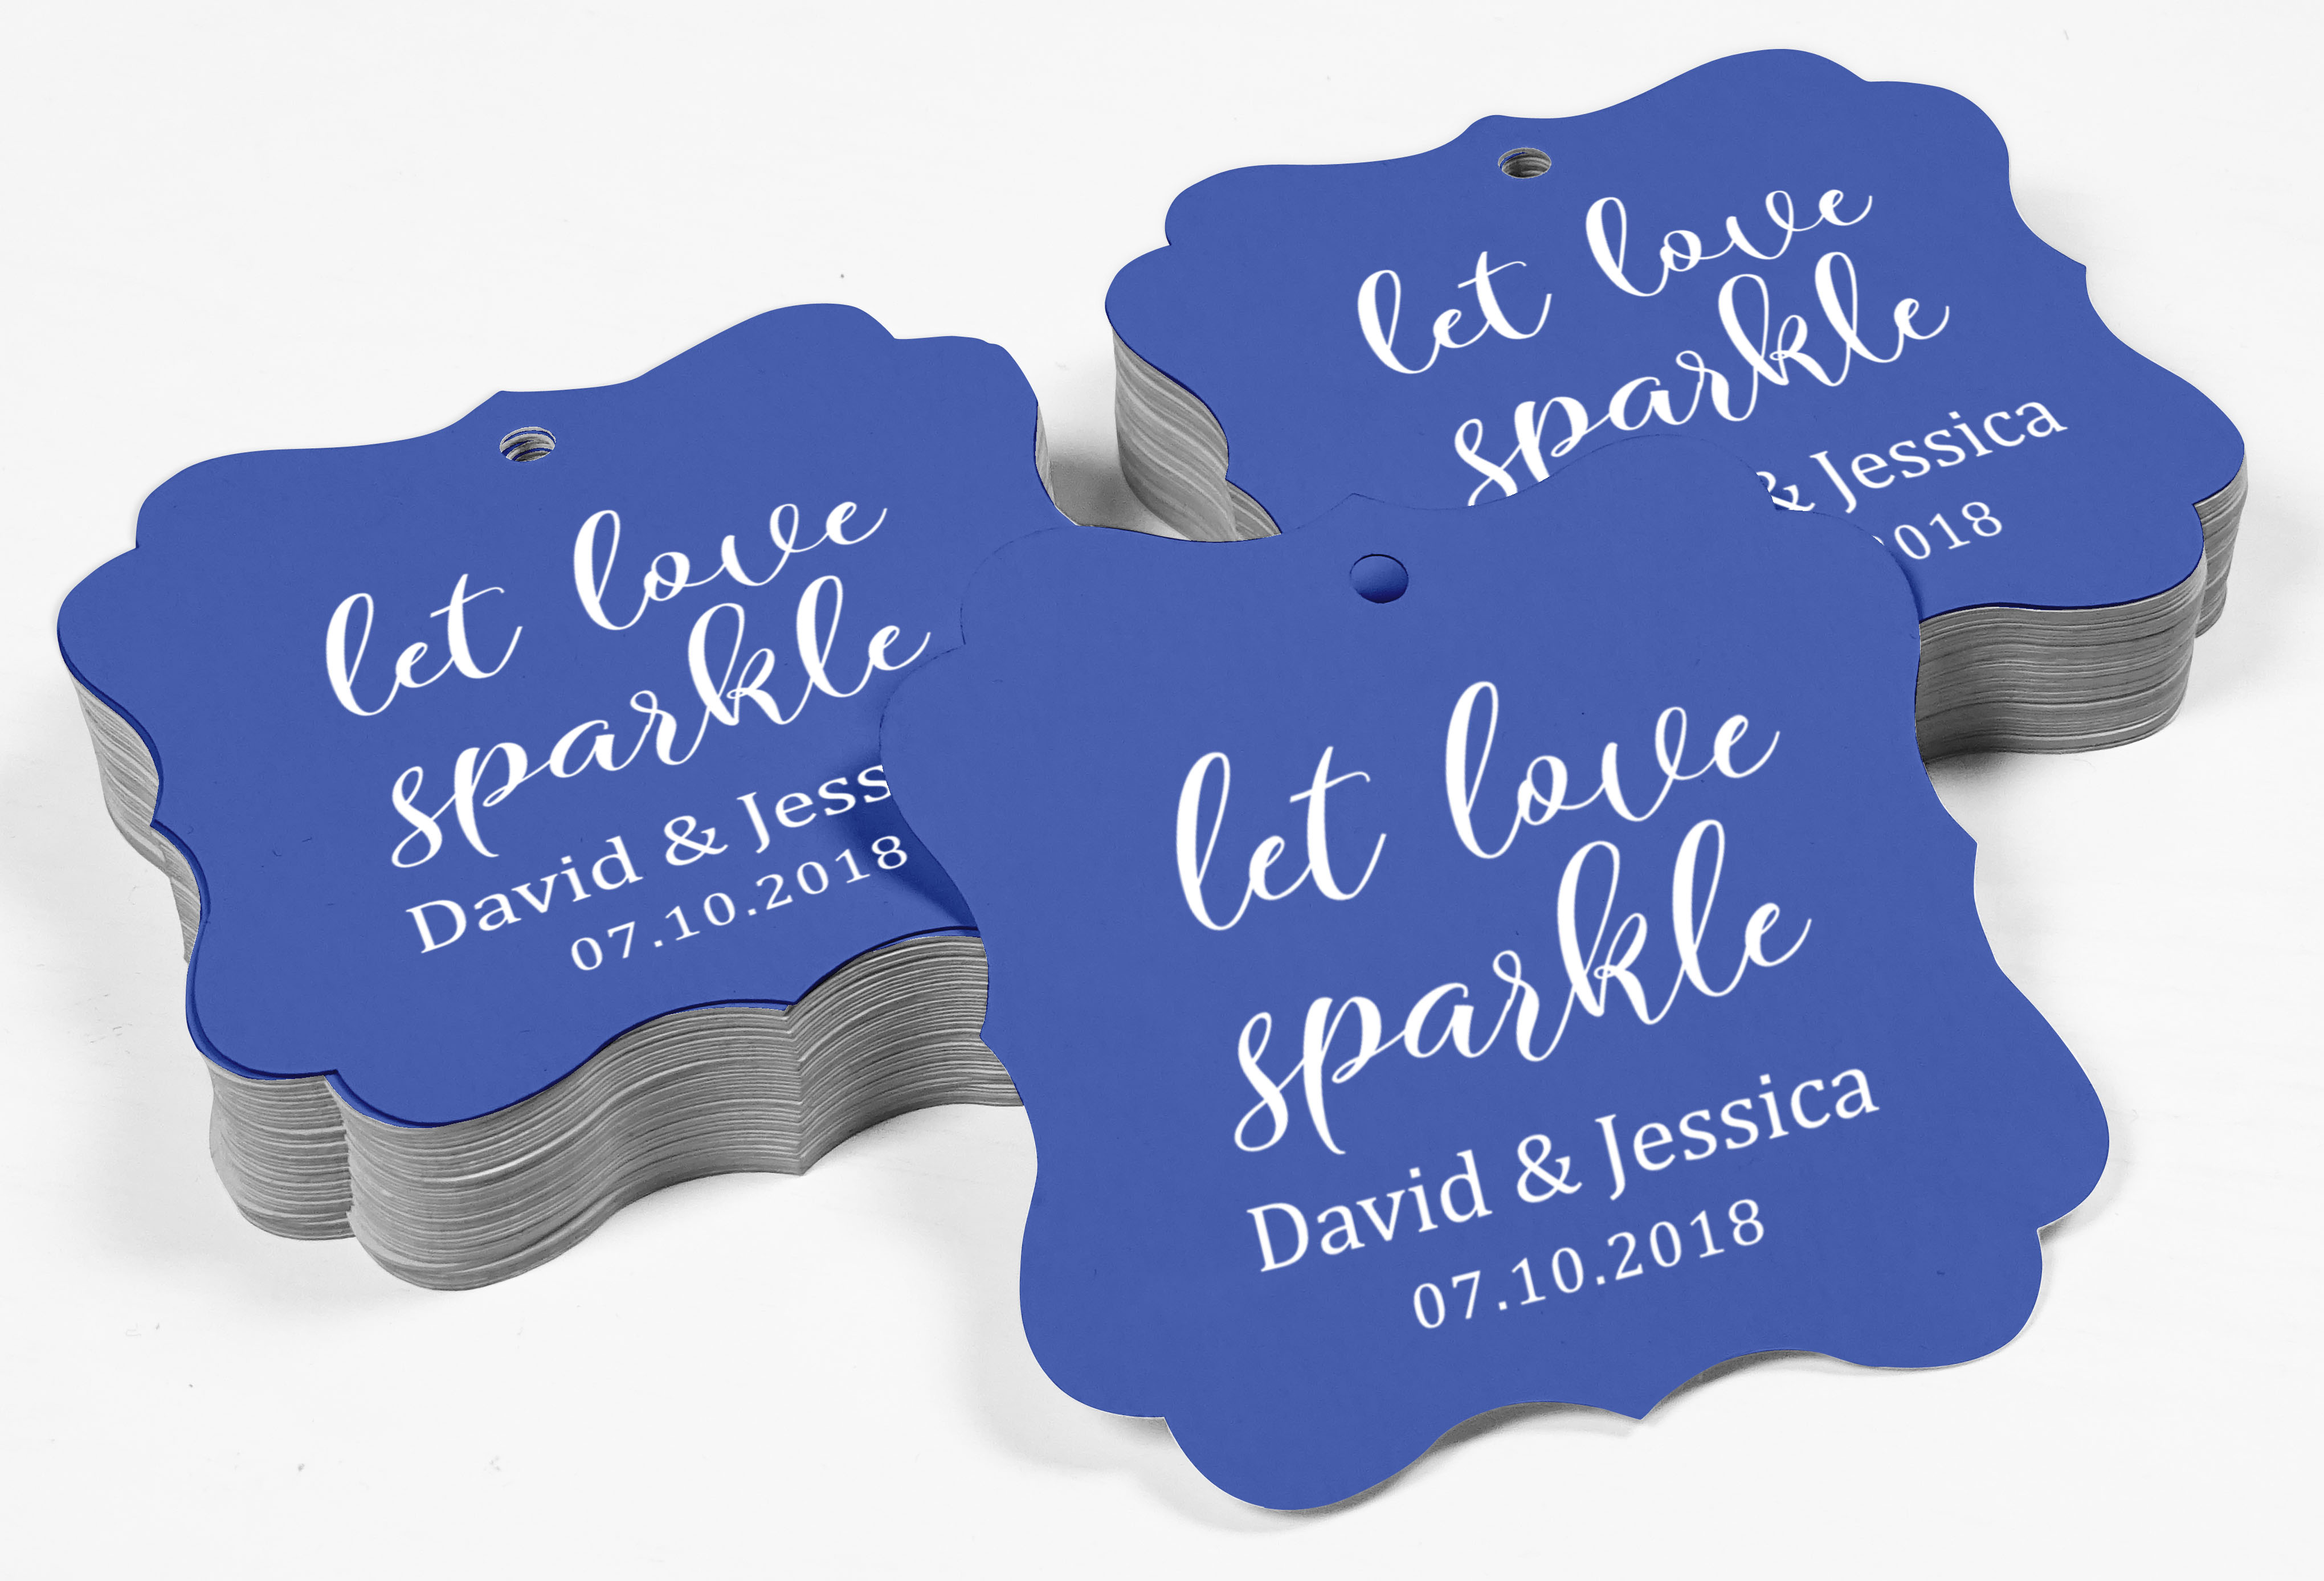 100 PCS Let Love Sparkle Customized Wedding Gift Paper Tags Personalized Wedding Favor Hang Tags